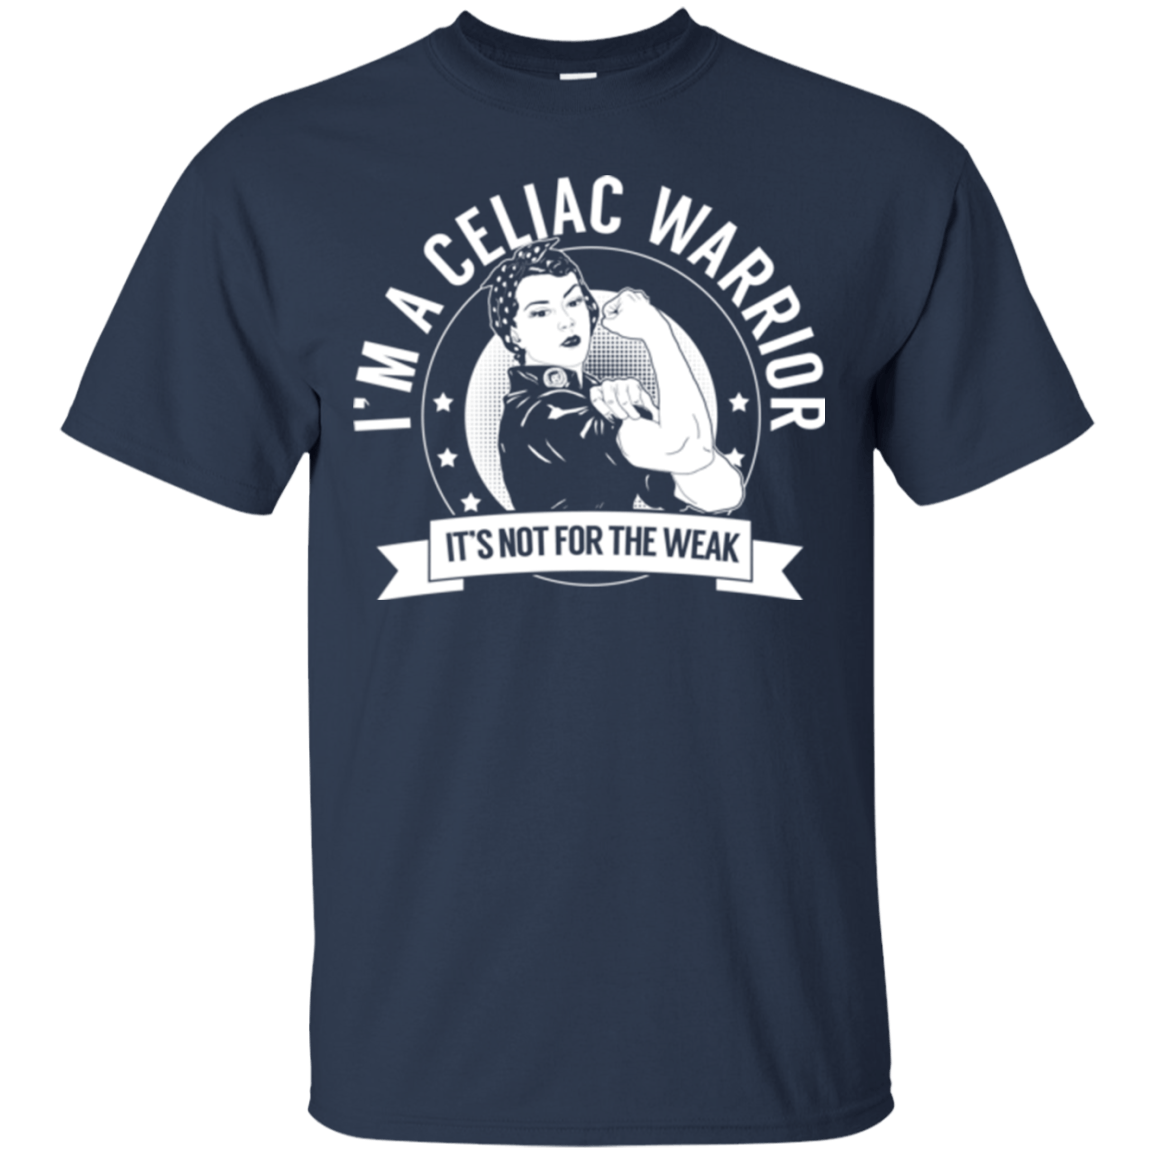 Celiac Warrior Not For The Weak Unisex Shirt - The Unchargeables